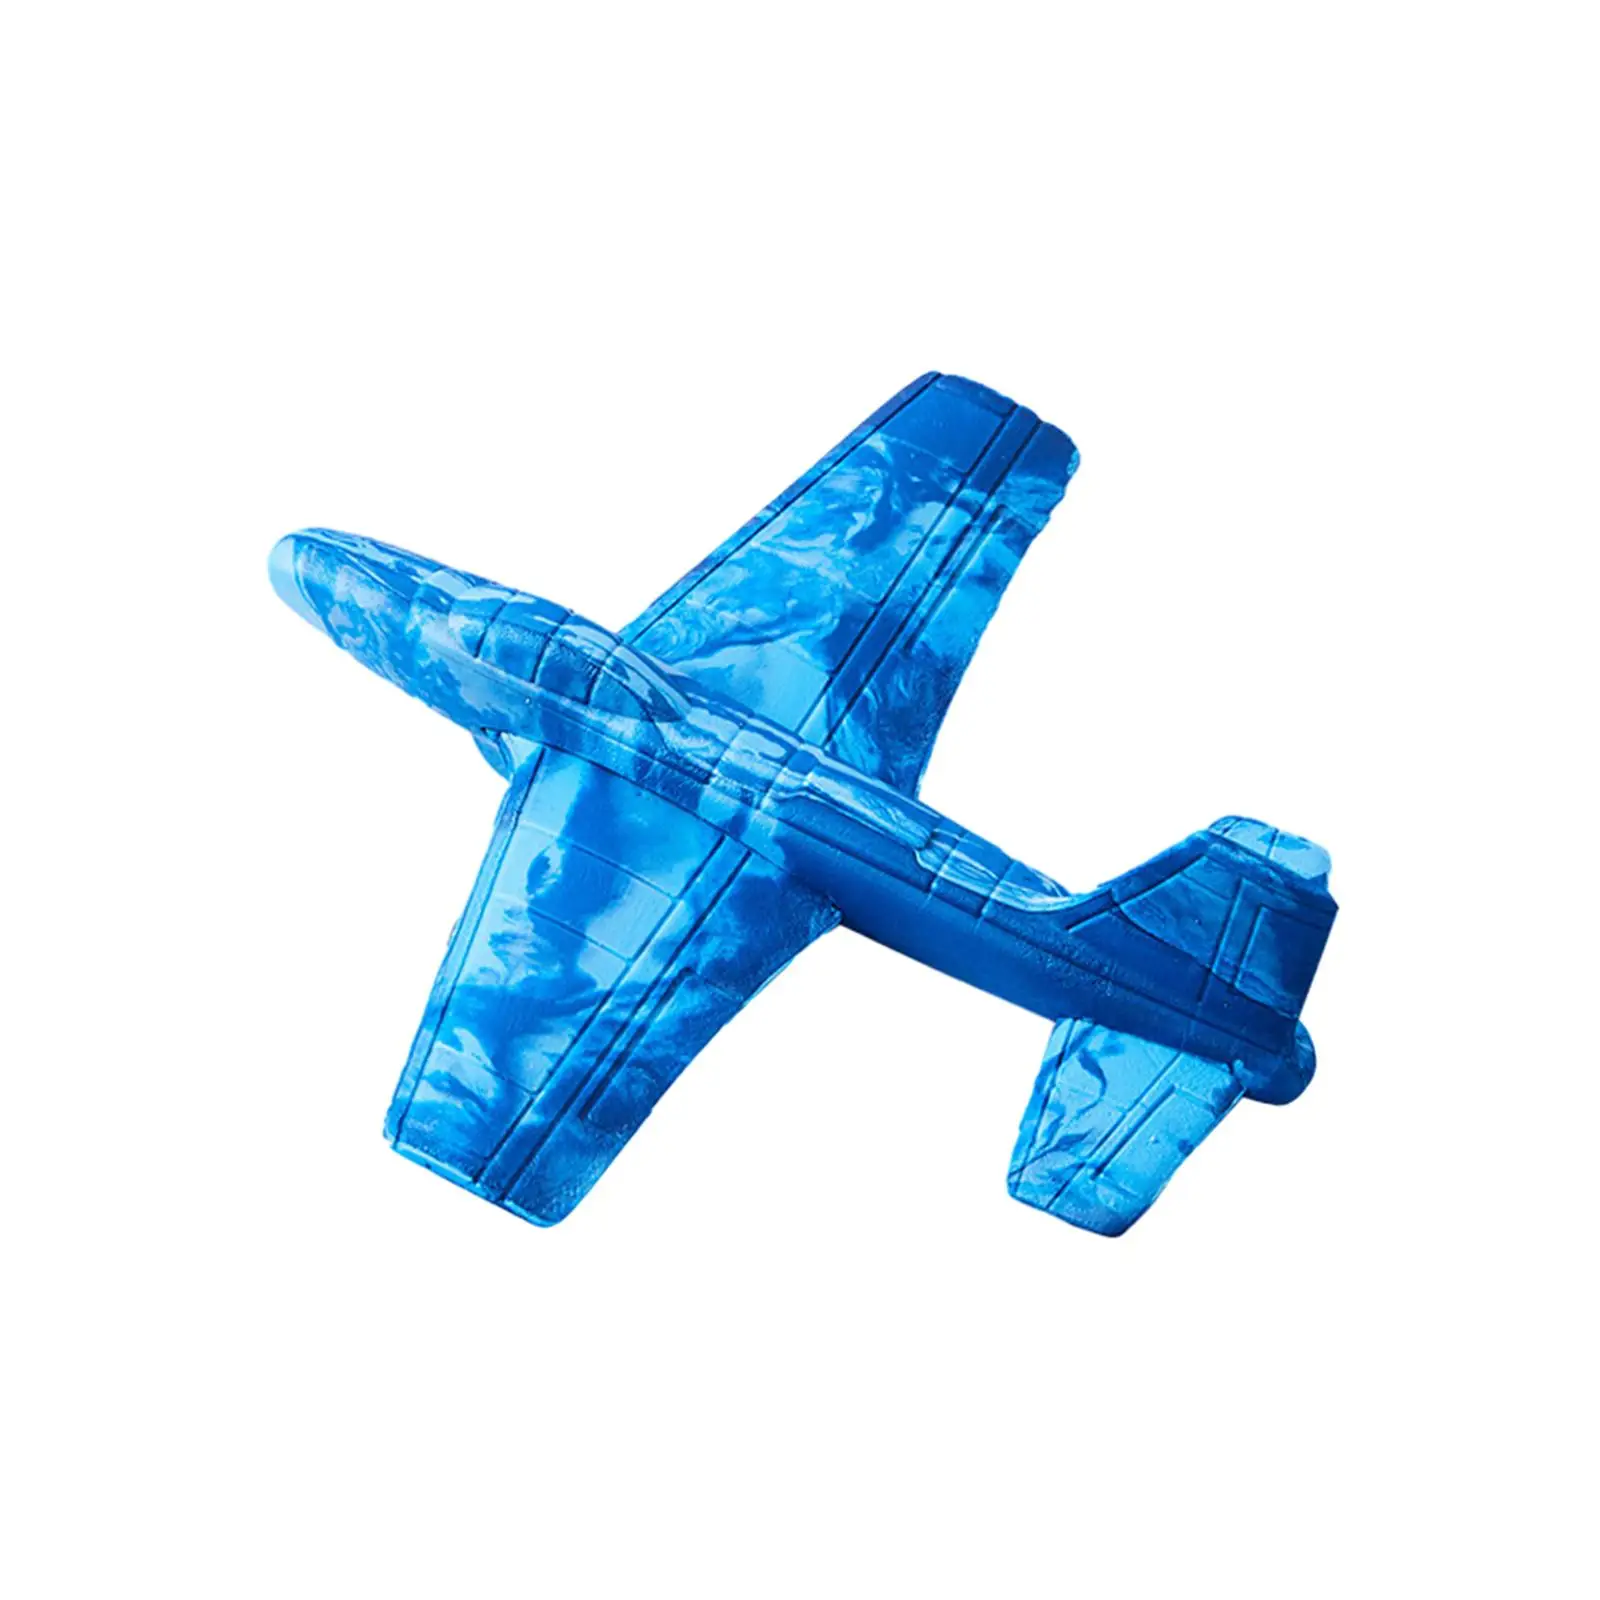 Foam Airplane Toy Backyard Hand Throwing Flying Toy Throwing Foam Plane Glider Toy for Boys Children Beginners Girls Party Favor